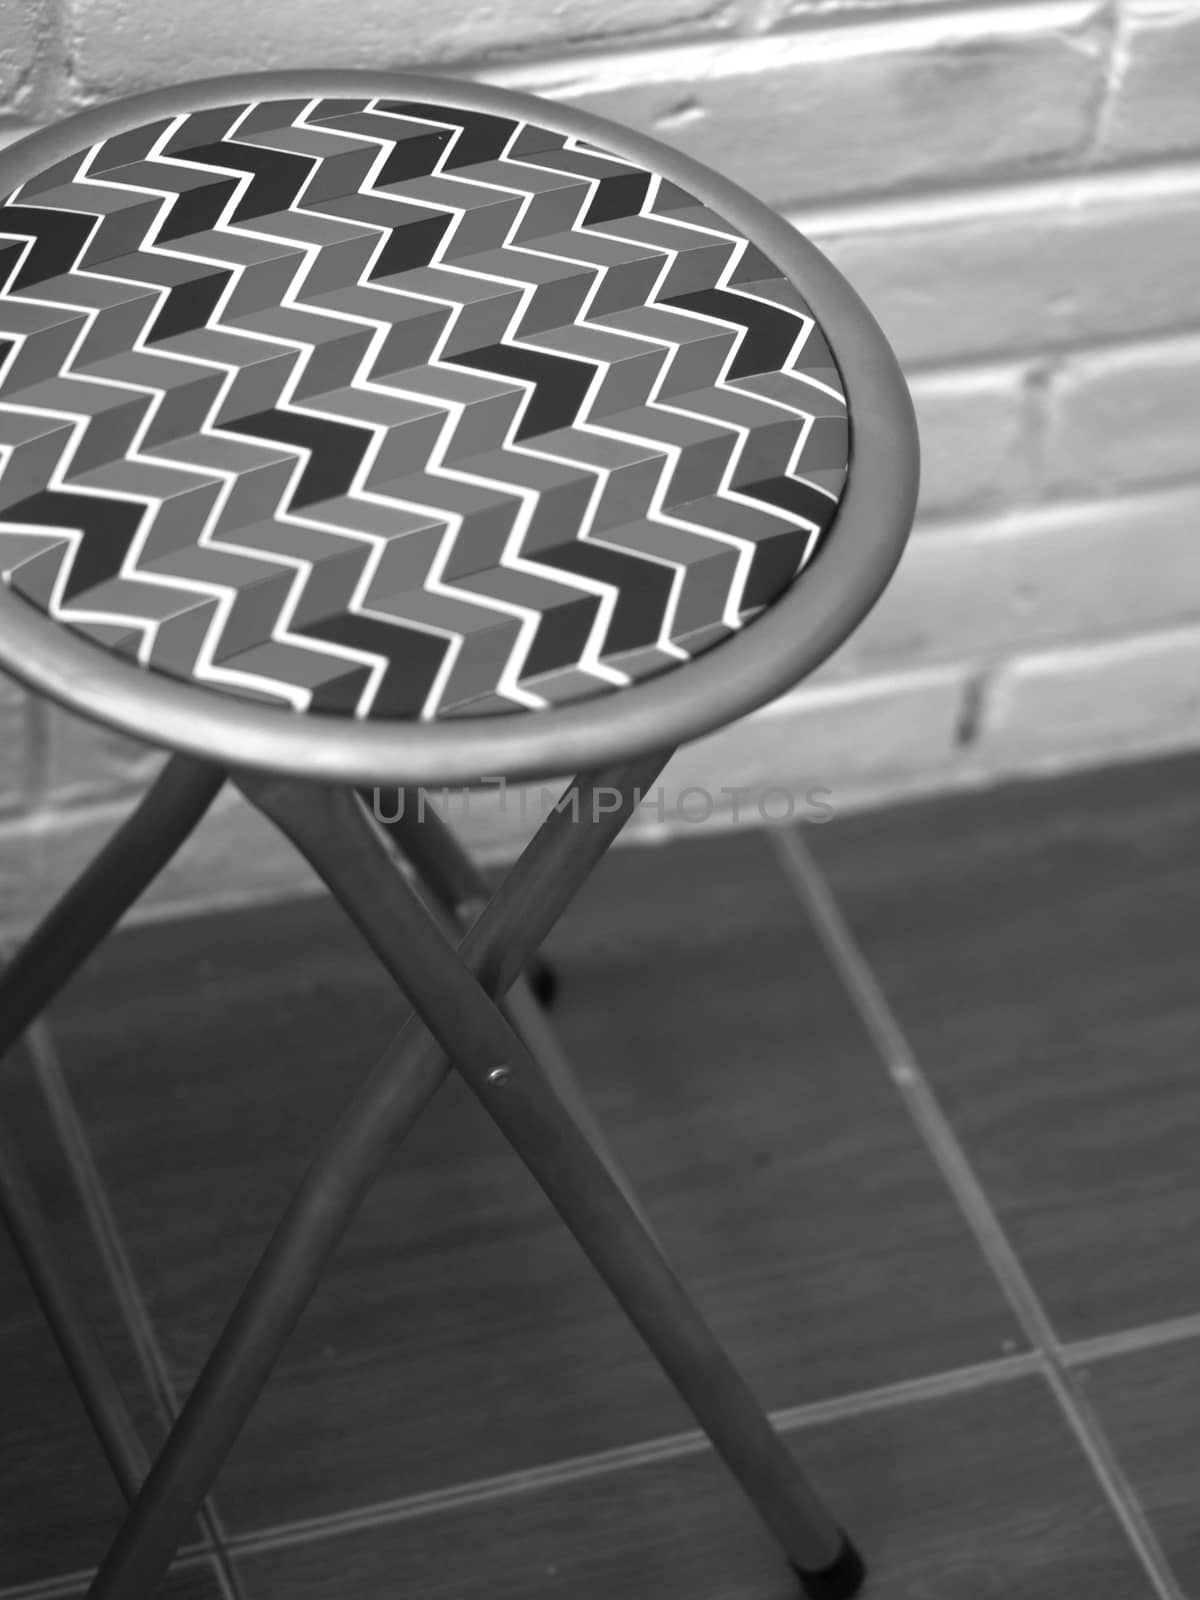 STOOL WITH ZIG ZAG PATTERN LEATHER by PrettyTG